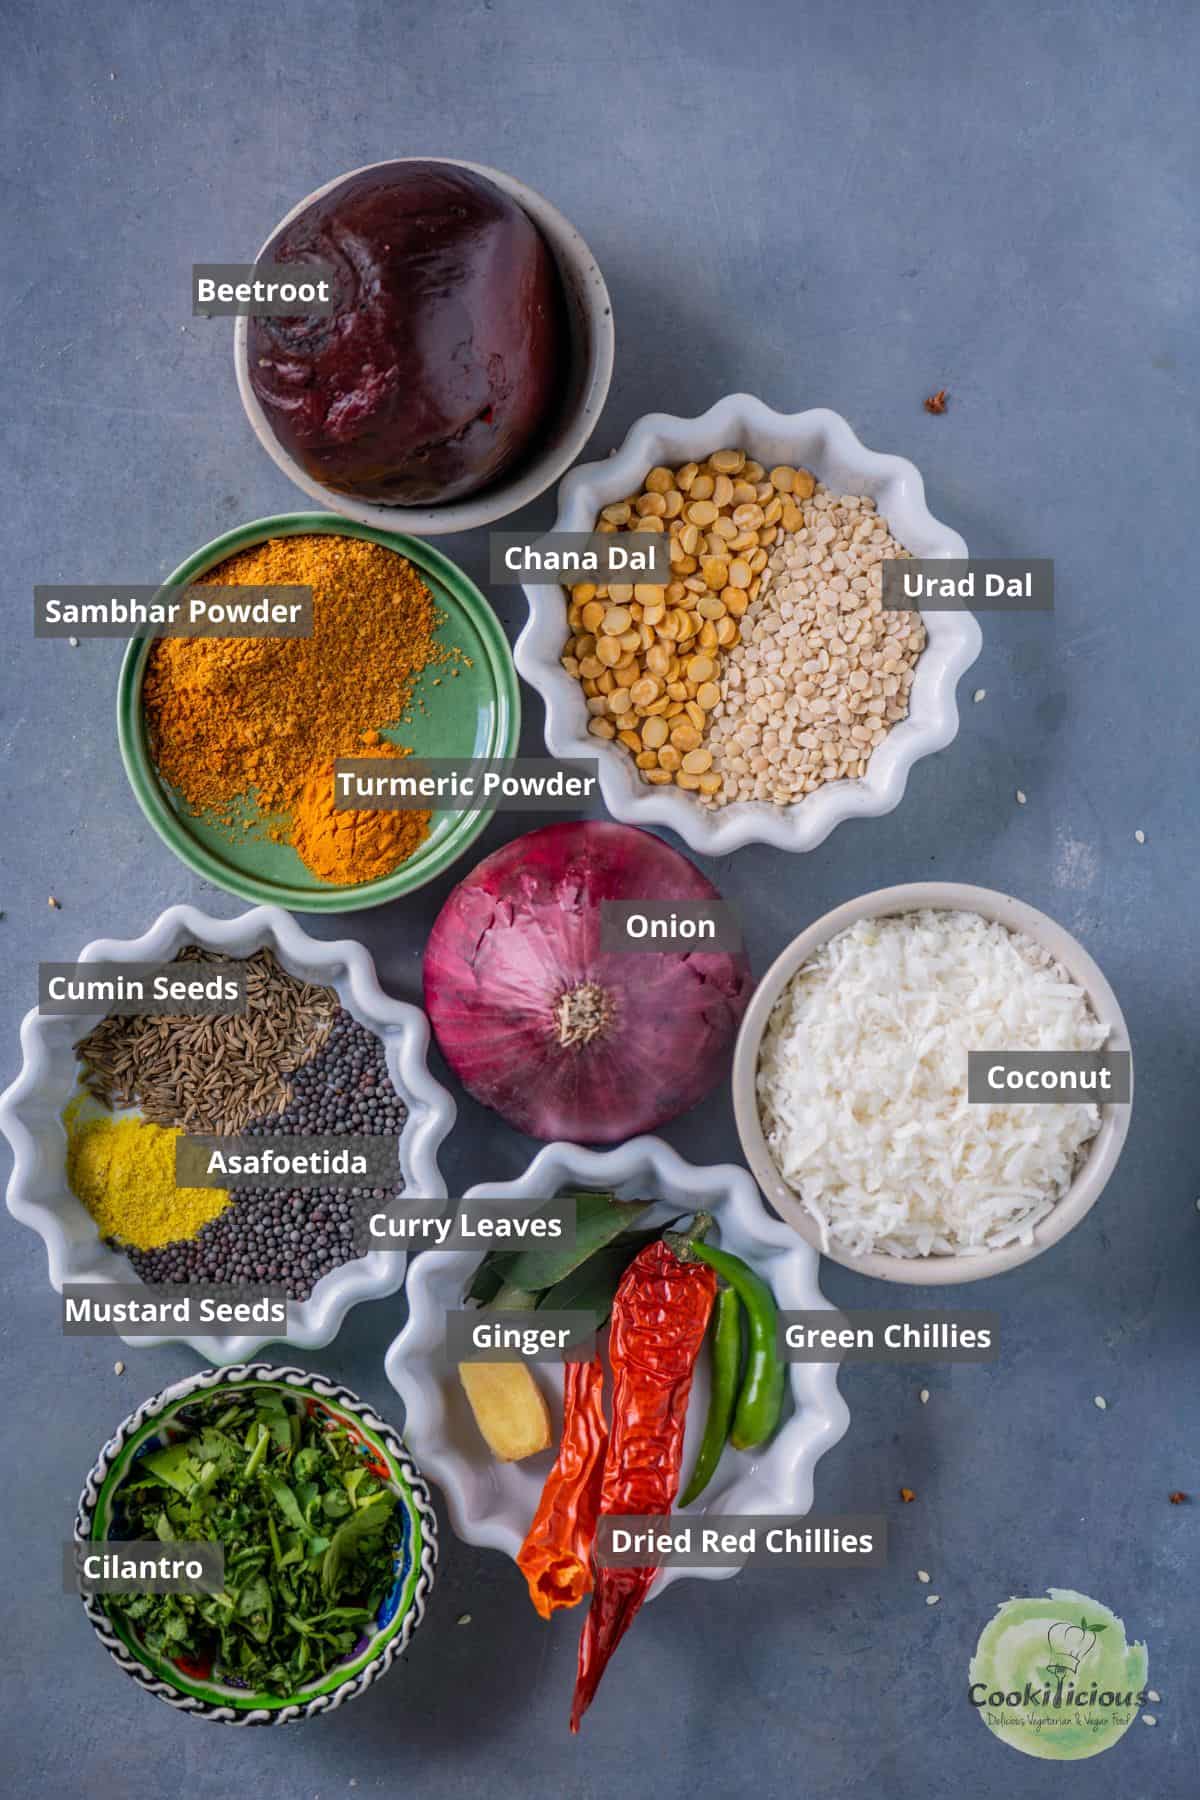 All the ingredients needed to make South Indian Beetroot Poriyal placed on a table with labels on them.